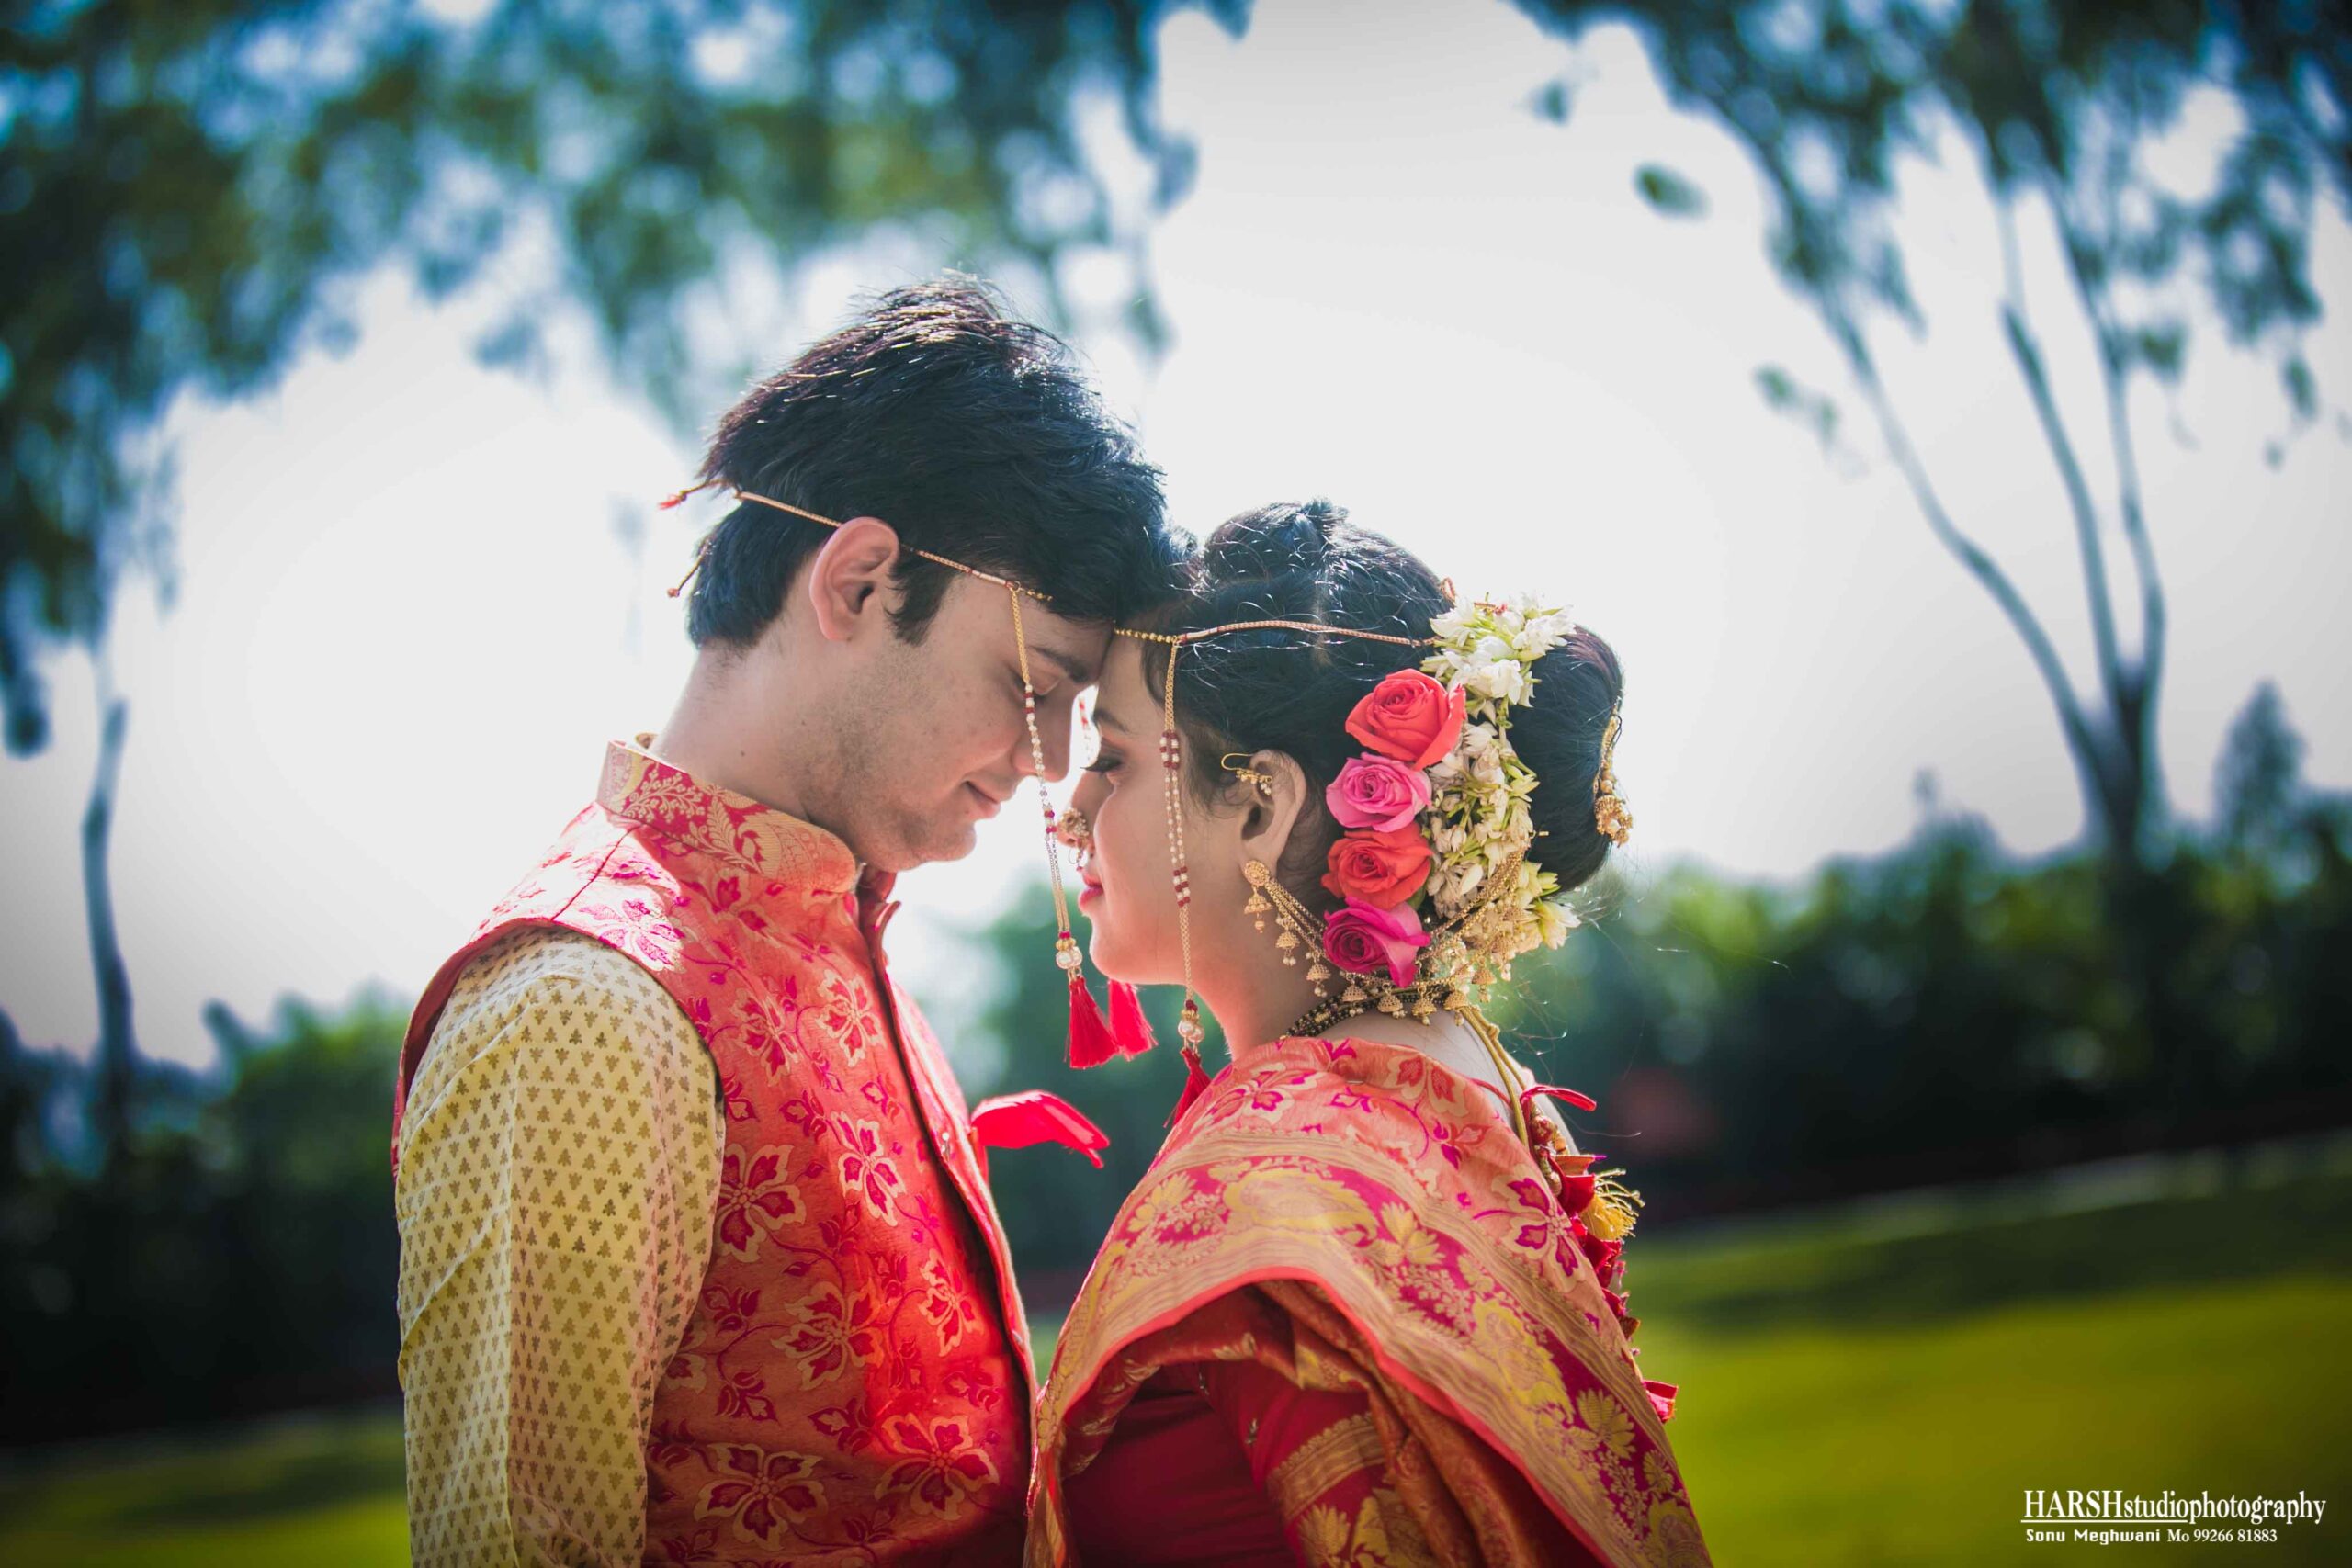 Candid Wedding Photography Indore - A bride and groom sharing a heartfelt moment amidst nature's beauty.